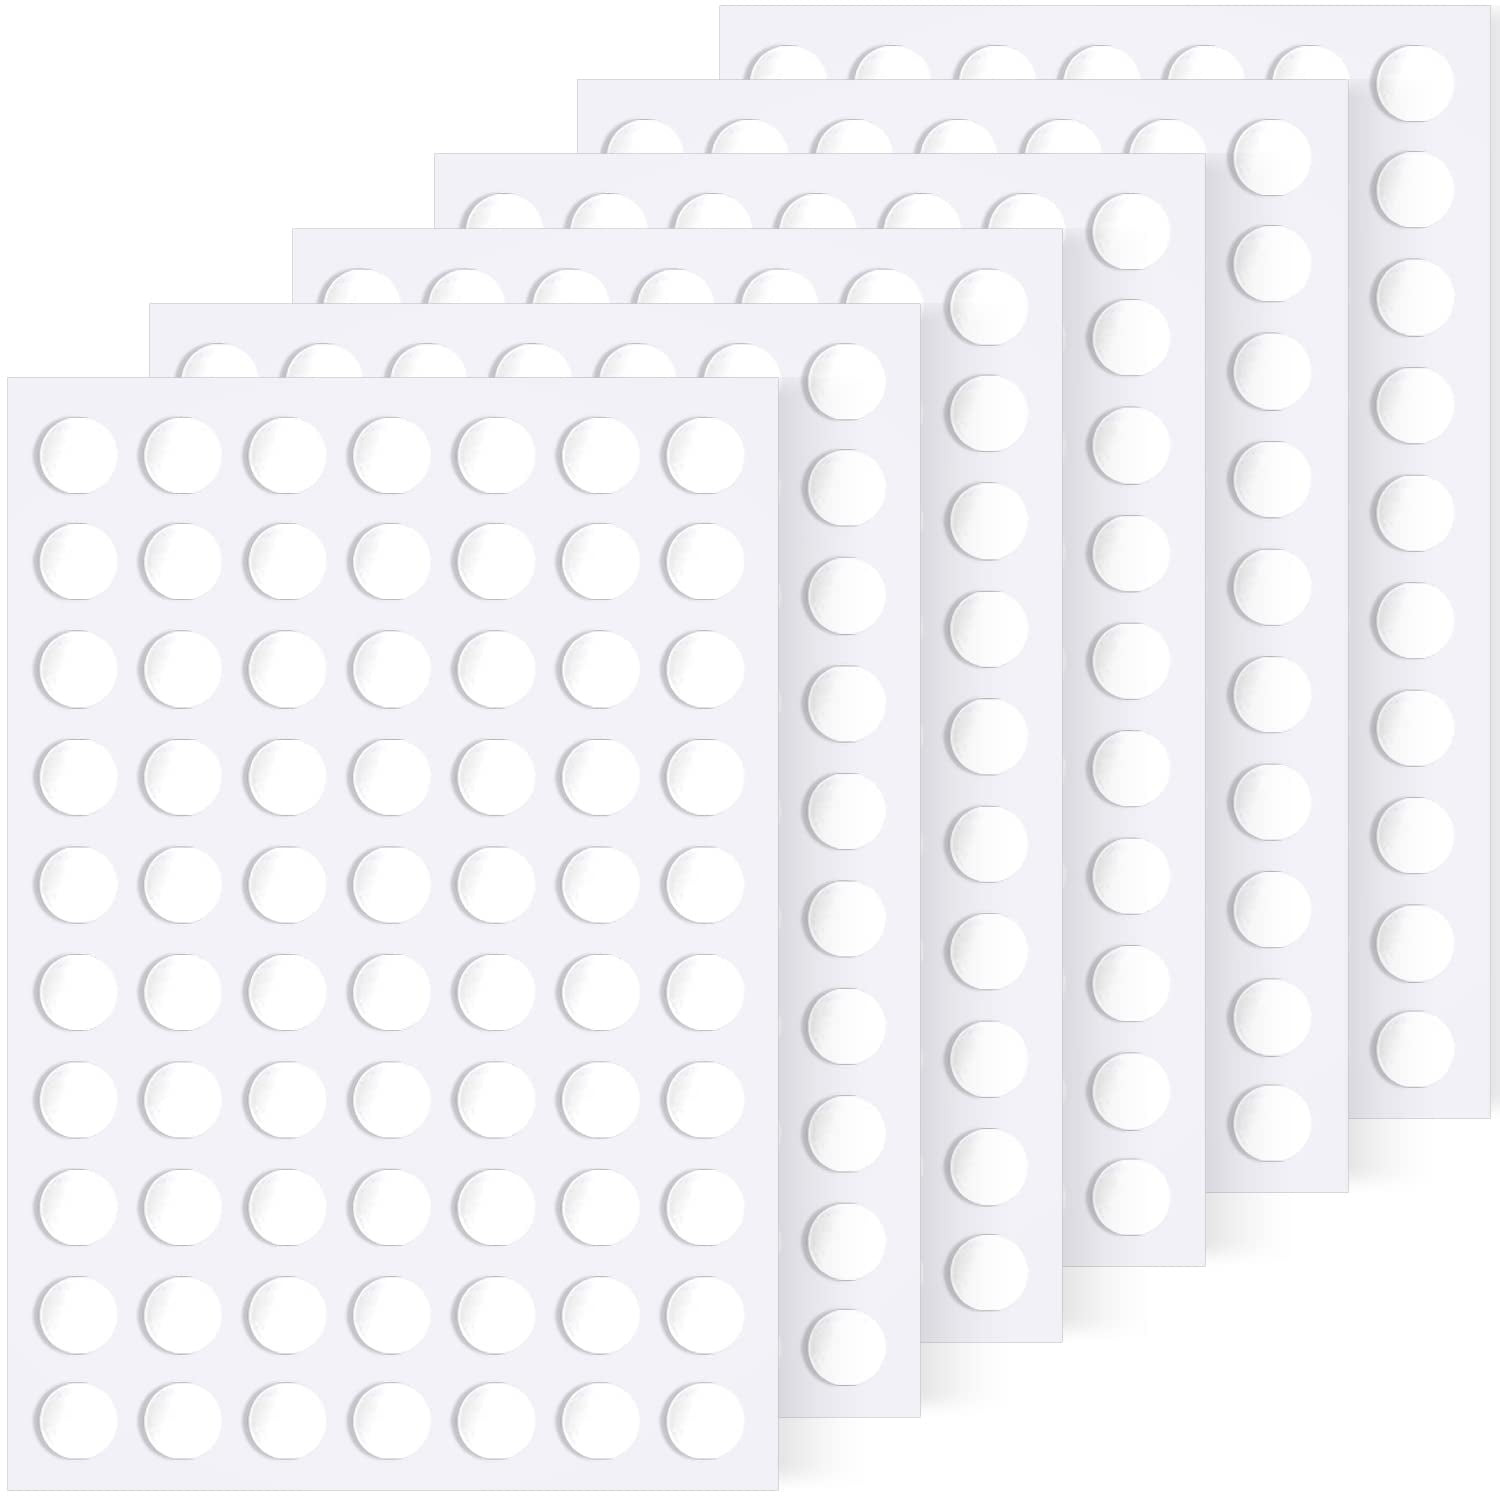 Sticky Dots, 420 6mm/0.24 Adhesive Tack, Double Sided Removable